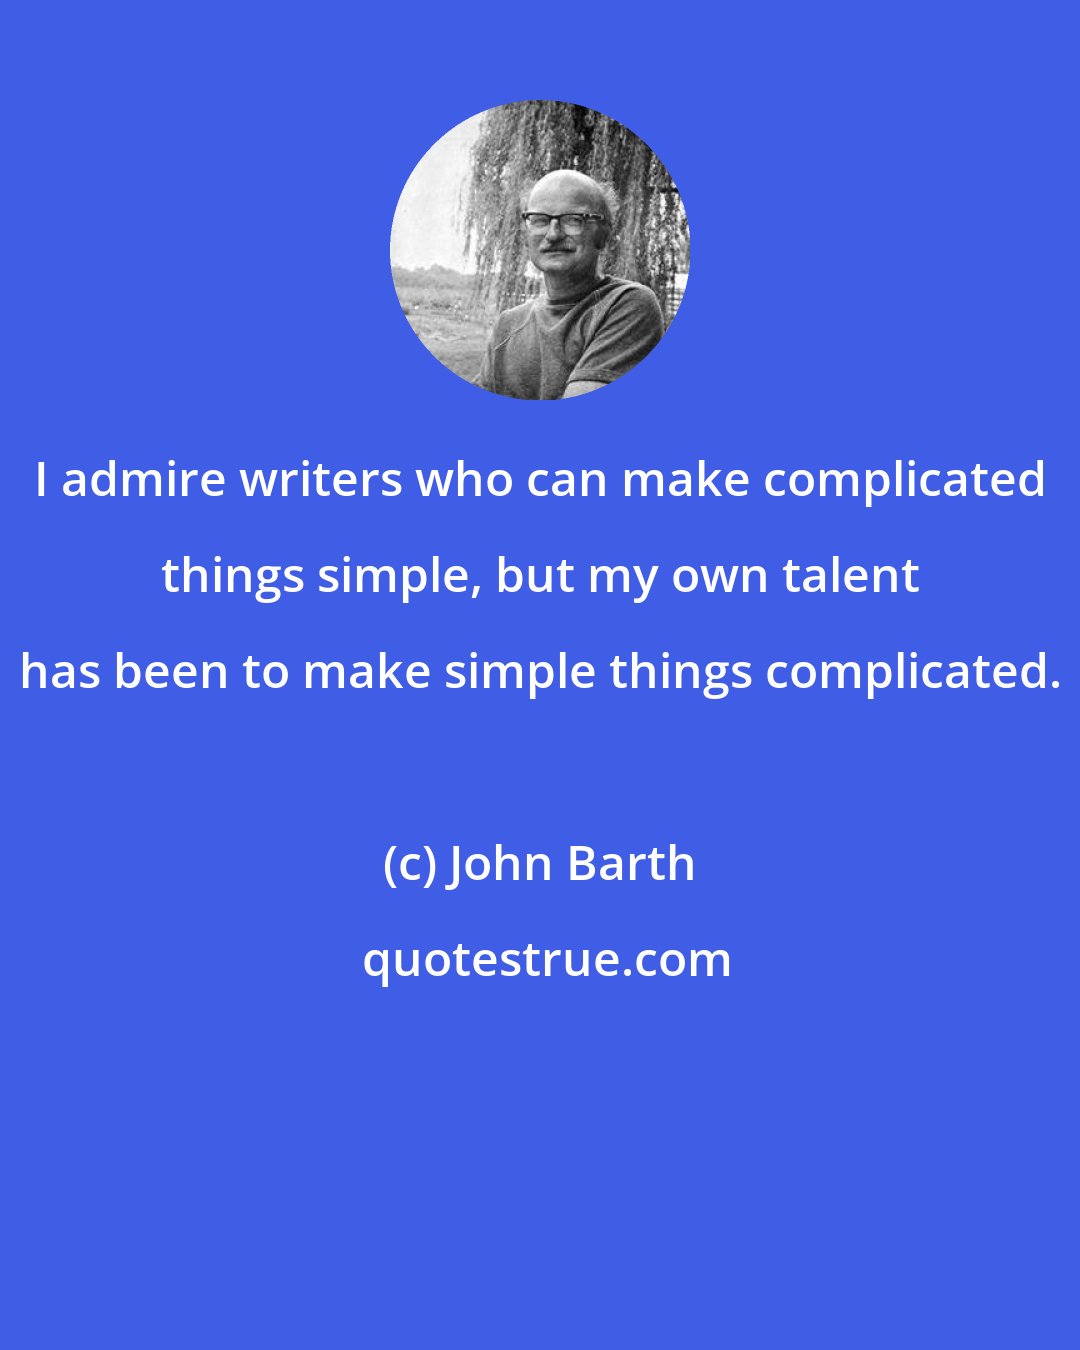 John Barth: I admire writers who can make complicated things simple, but my own talent has been to make simple things complicated.